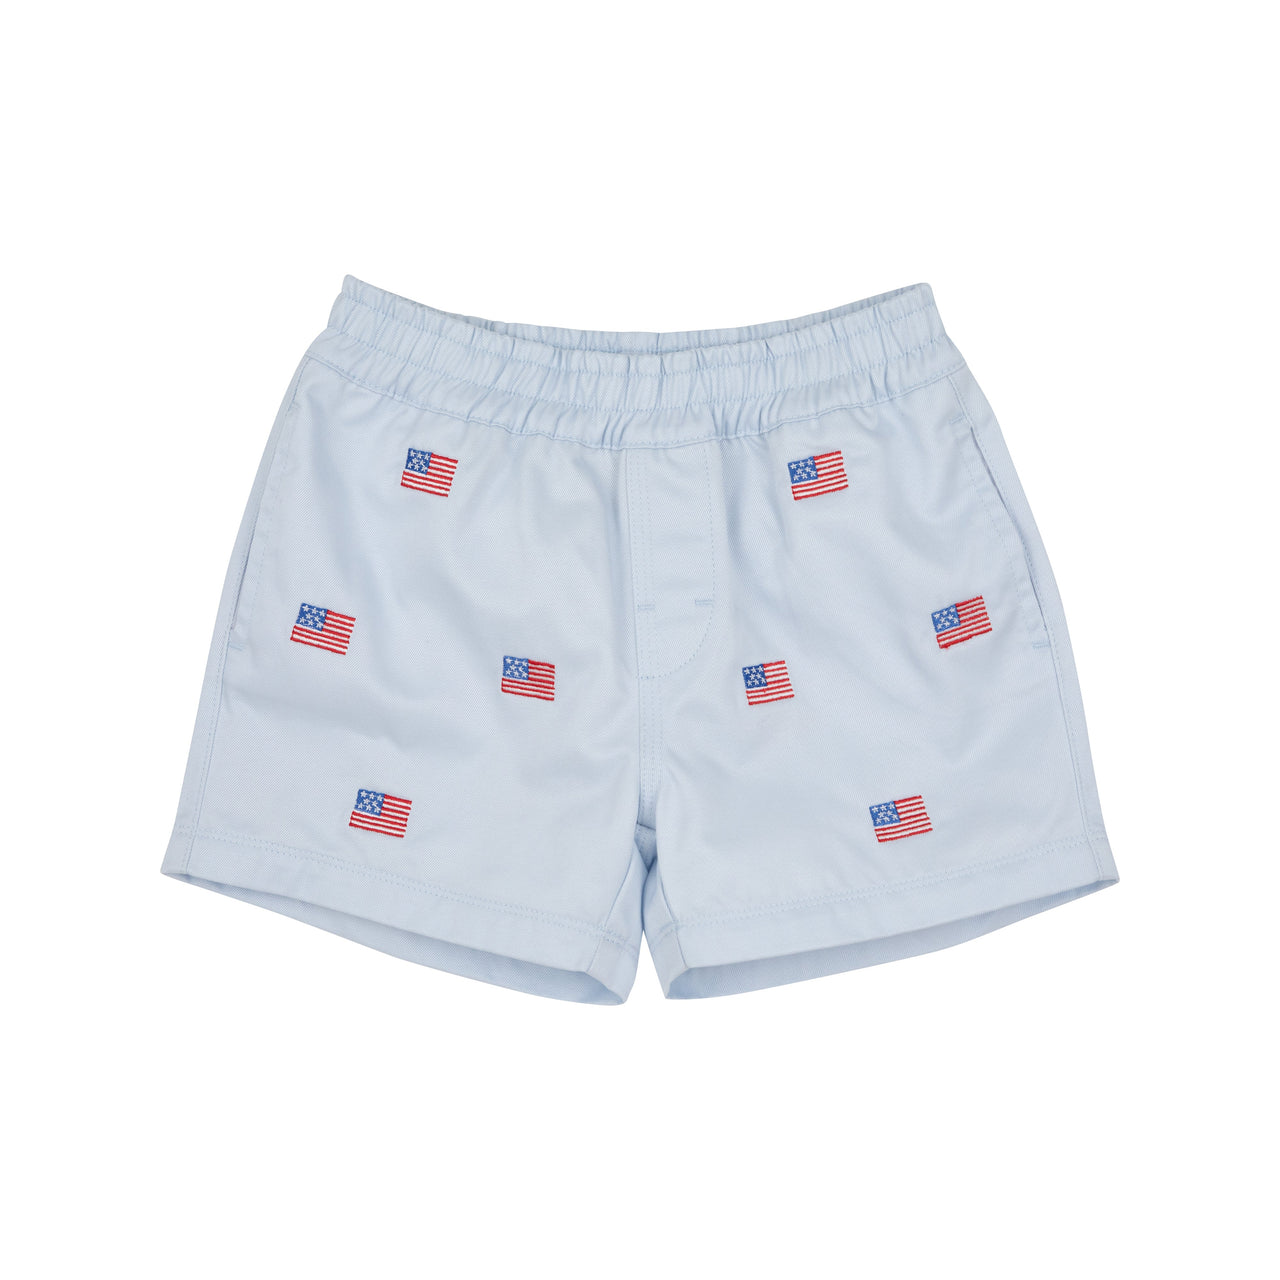 Critter Sheffield Shorts | Buckhead Blue & American Flag Embroidery with Multicolor Stork